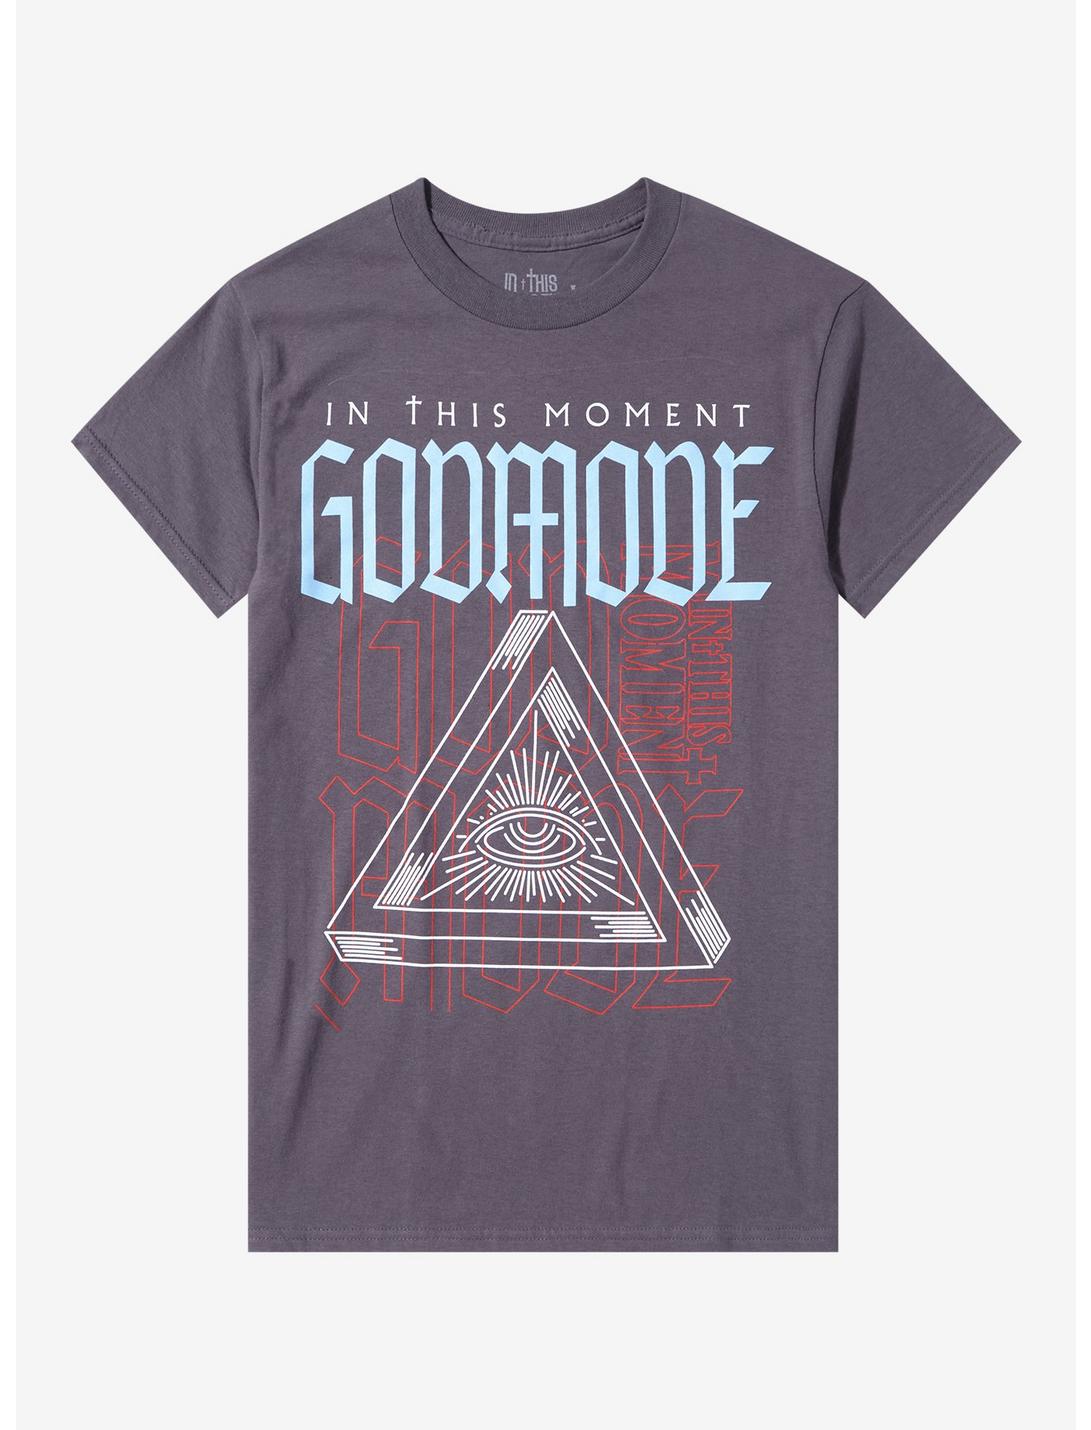 In This Moment Godmode Boyfriend Fit Girls T-Shirt, CHARCOAL, hi-res